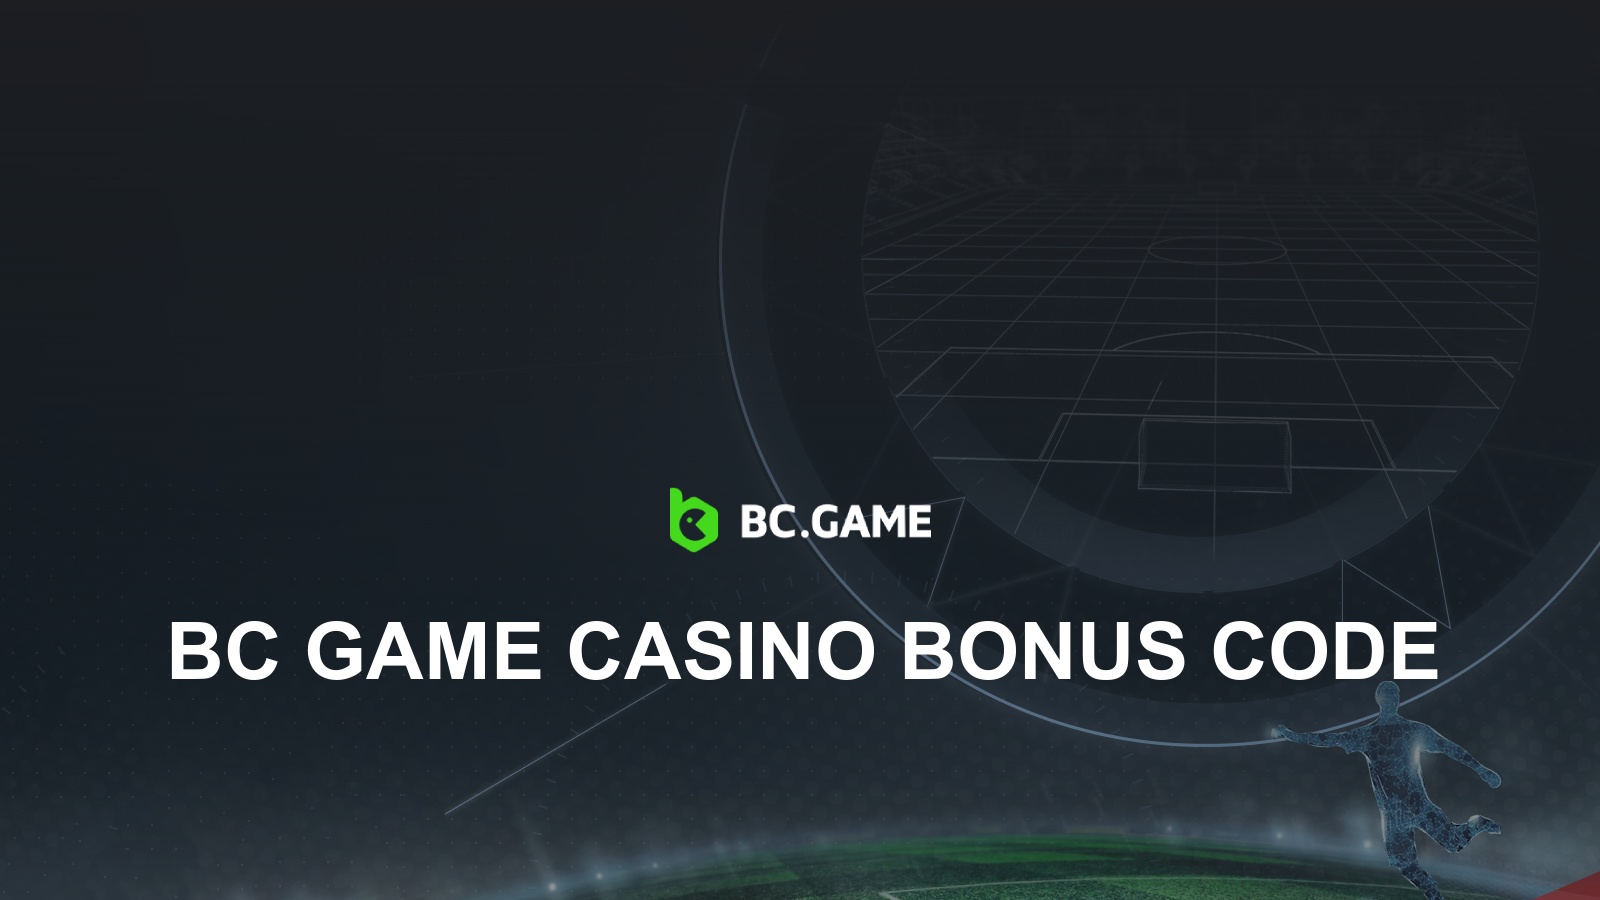 How Much Do You Charge For BC.Game Brazil Casino